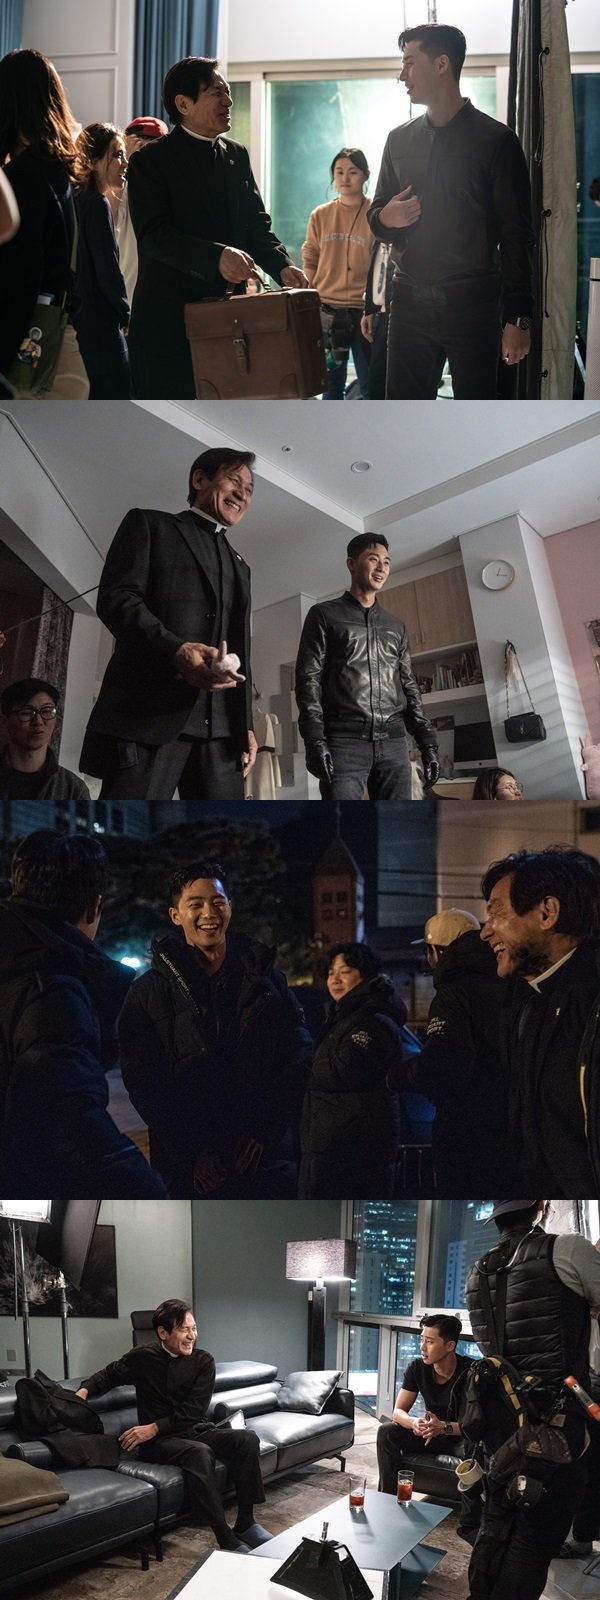 The popular Park Seo-joon and national actor Ahn Sung-ki met.The movie The Lion (director Kim Joo-hwan) released the scene stills of Park Seo-joon and Ahn Sung-ki on the 8th.The Lion is a film about a fighting champion, Yonghu (Park Seo-joon), who meets the Old Man priest Anshinbu (Ahn Sung-ki) and confronts the powerful evil (), which has confused the world.Unlike the intense and charismatic appearance in the movie, Park Seo-joon and Ahn Sung-ki, who have not been laughing in the field, are expected to show a special breath beyond the generation through lion.Especially, after losing his father in an accident of injustice as a child, Yonghu, who has only distrust of the world, meets Anshinbu who carries out his mission with his life based on his strong beliefs, and the special activity of those who confront the evil of the world gives a cinematic pleasure.Park Seo-joon said of Ahn Sung-ki, It was like a real father.I depended on you a lot on the set, and by the end of the filming, I think I learned about life because of you. Park Seo-joon is a charm, and I have a good breathing and I want to continue working together, said Ahn Sung-ki.The Lion is scheduled to open on the 31st.